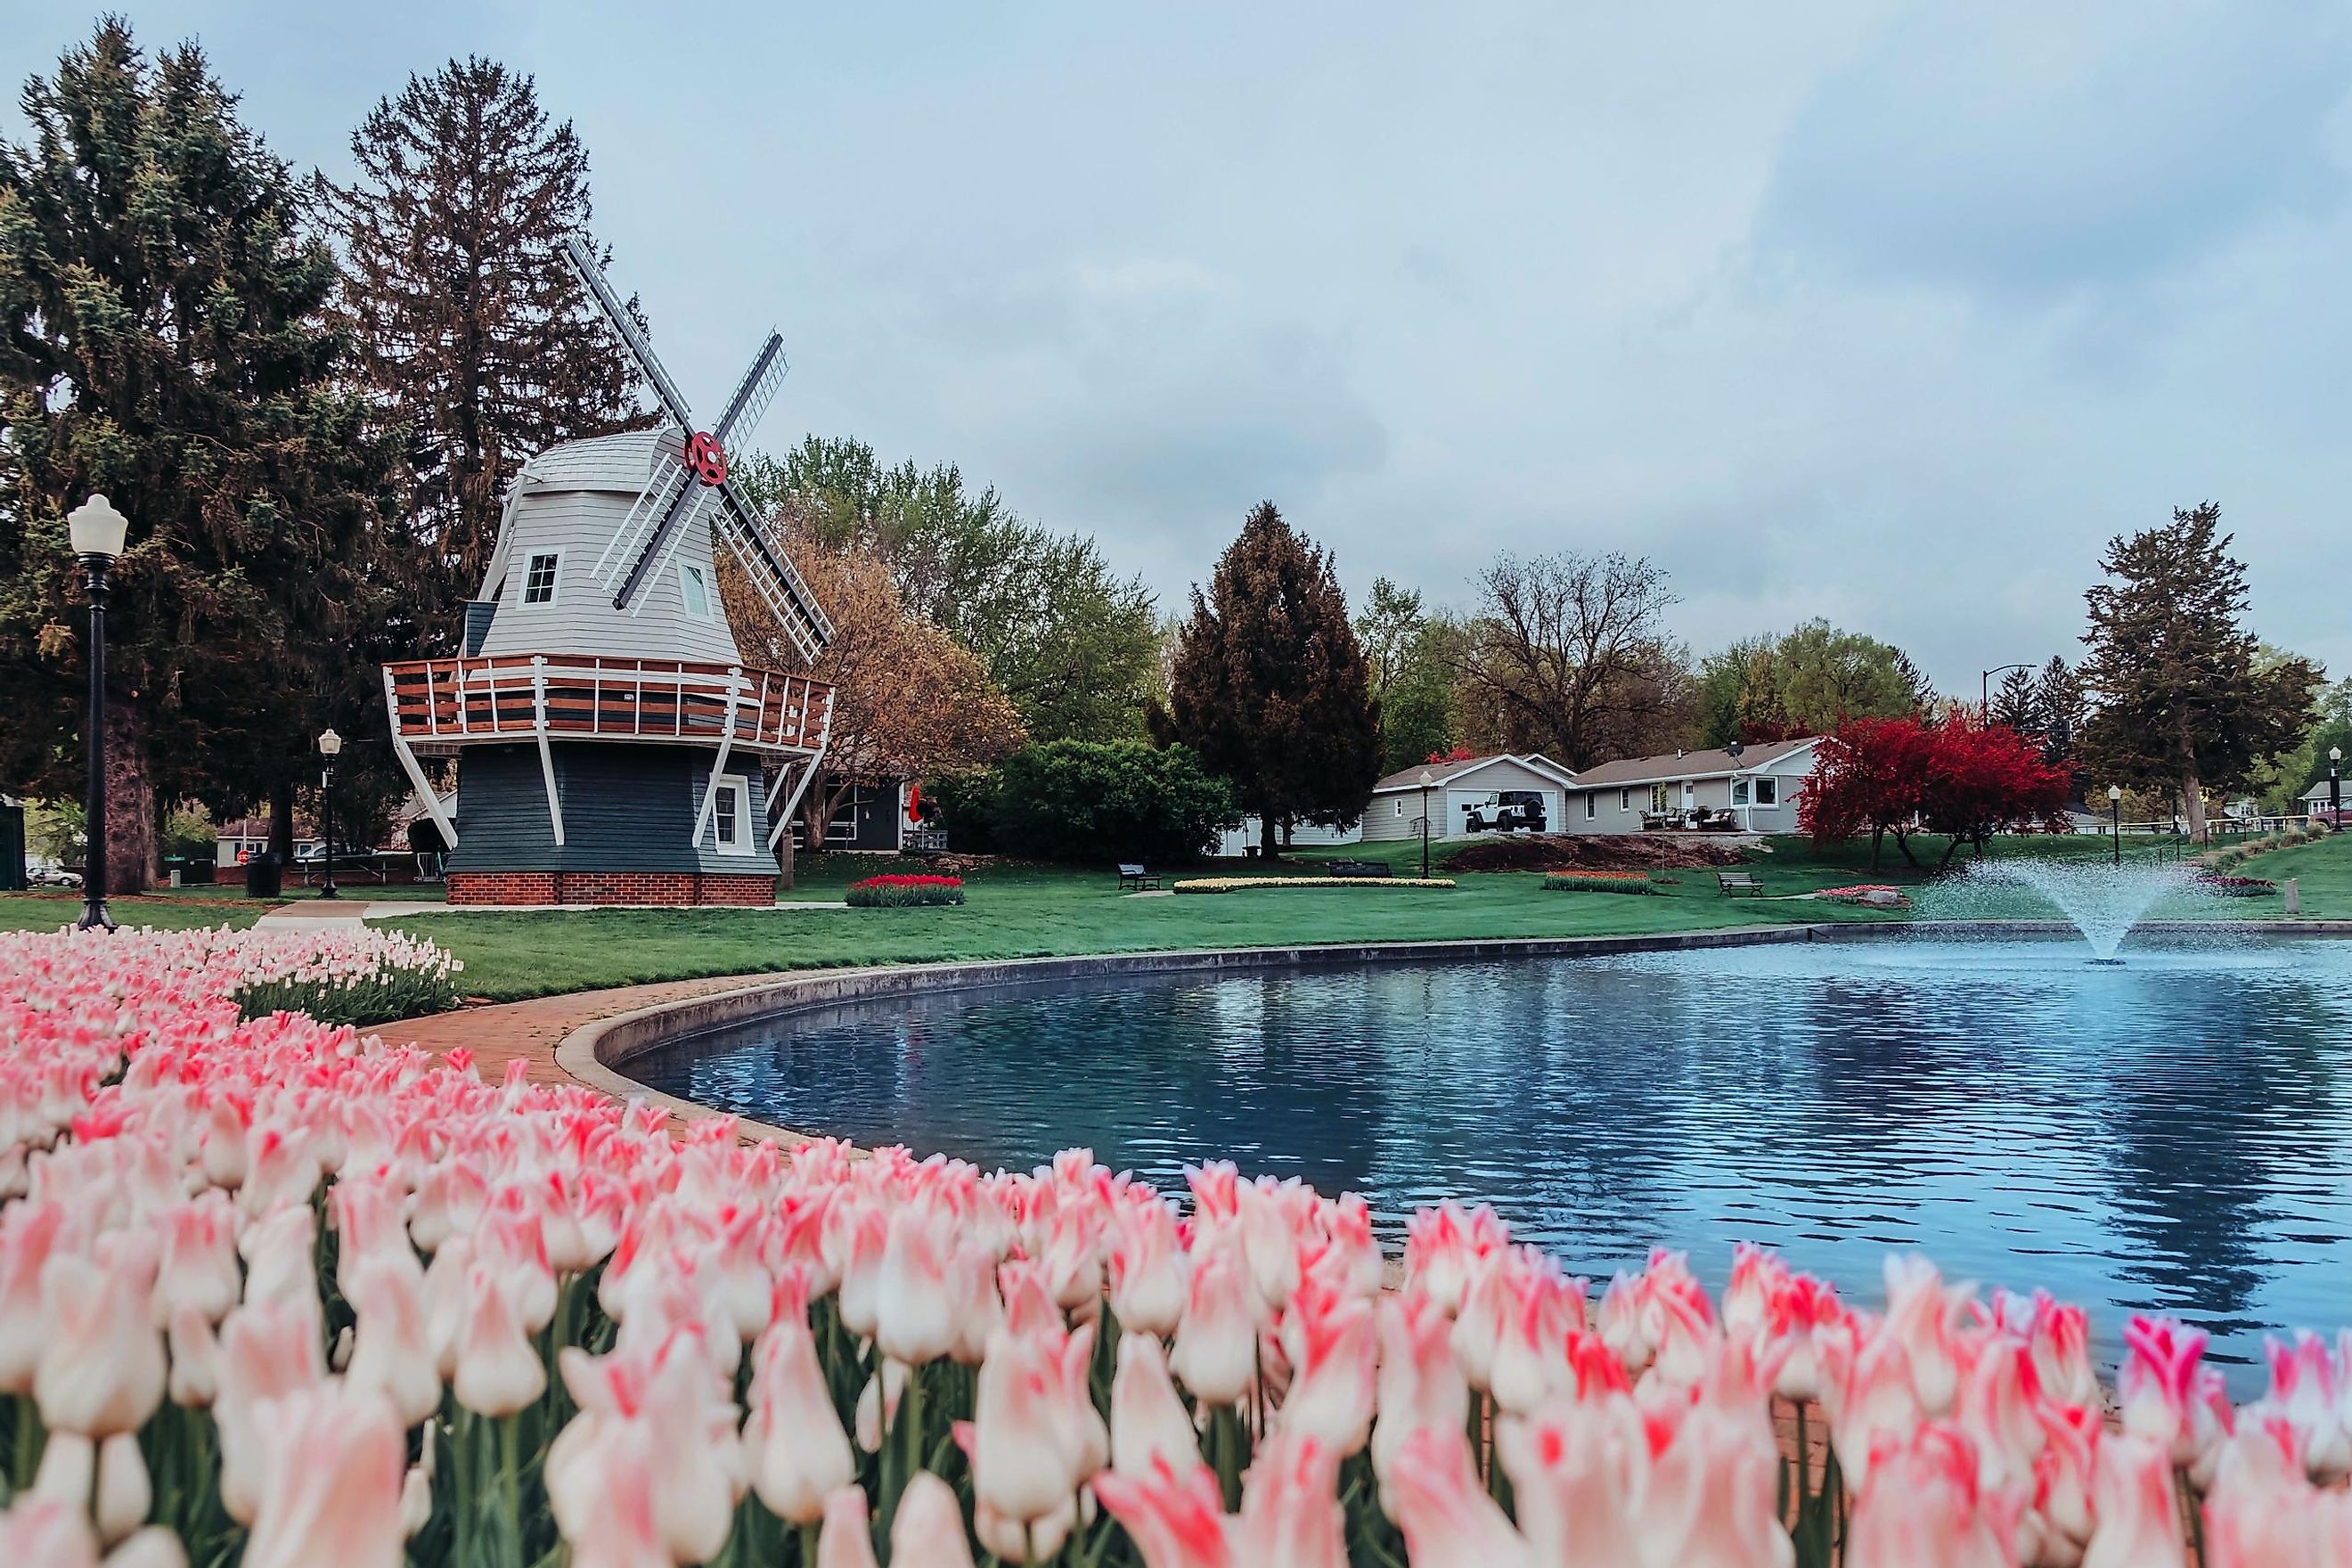 Pink tulips around a pond with a Dutch windmill and other beds of tulips and spring trees in the Sunken Gardens Park in Pella